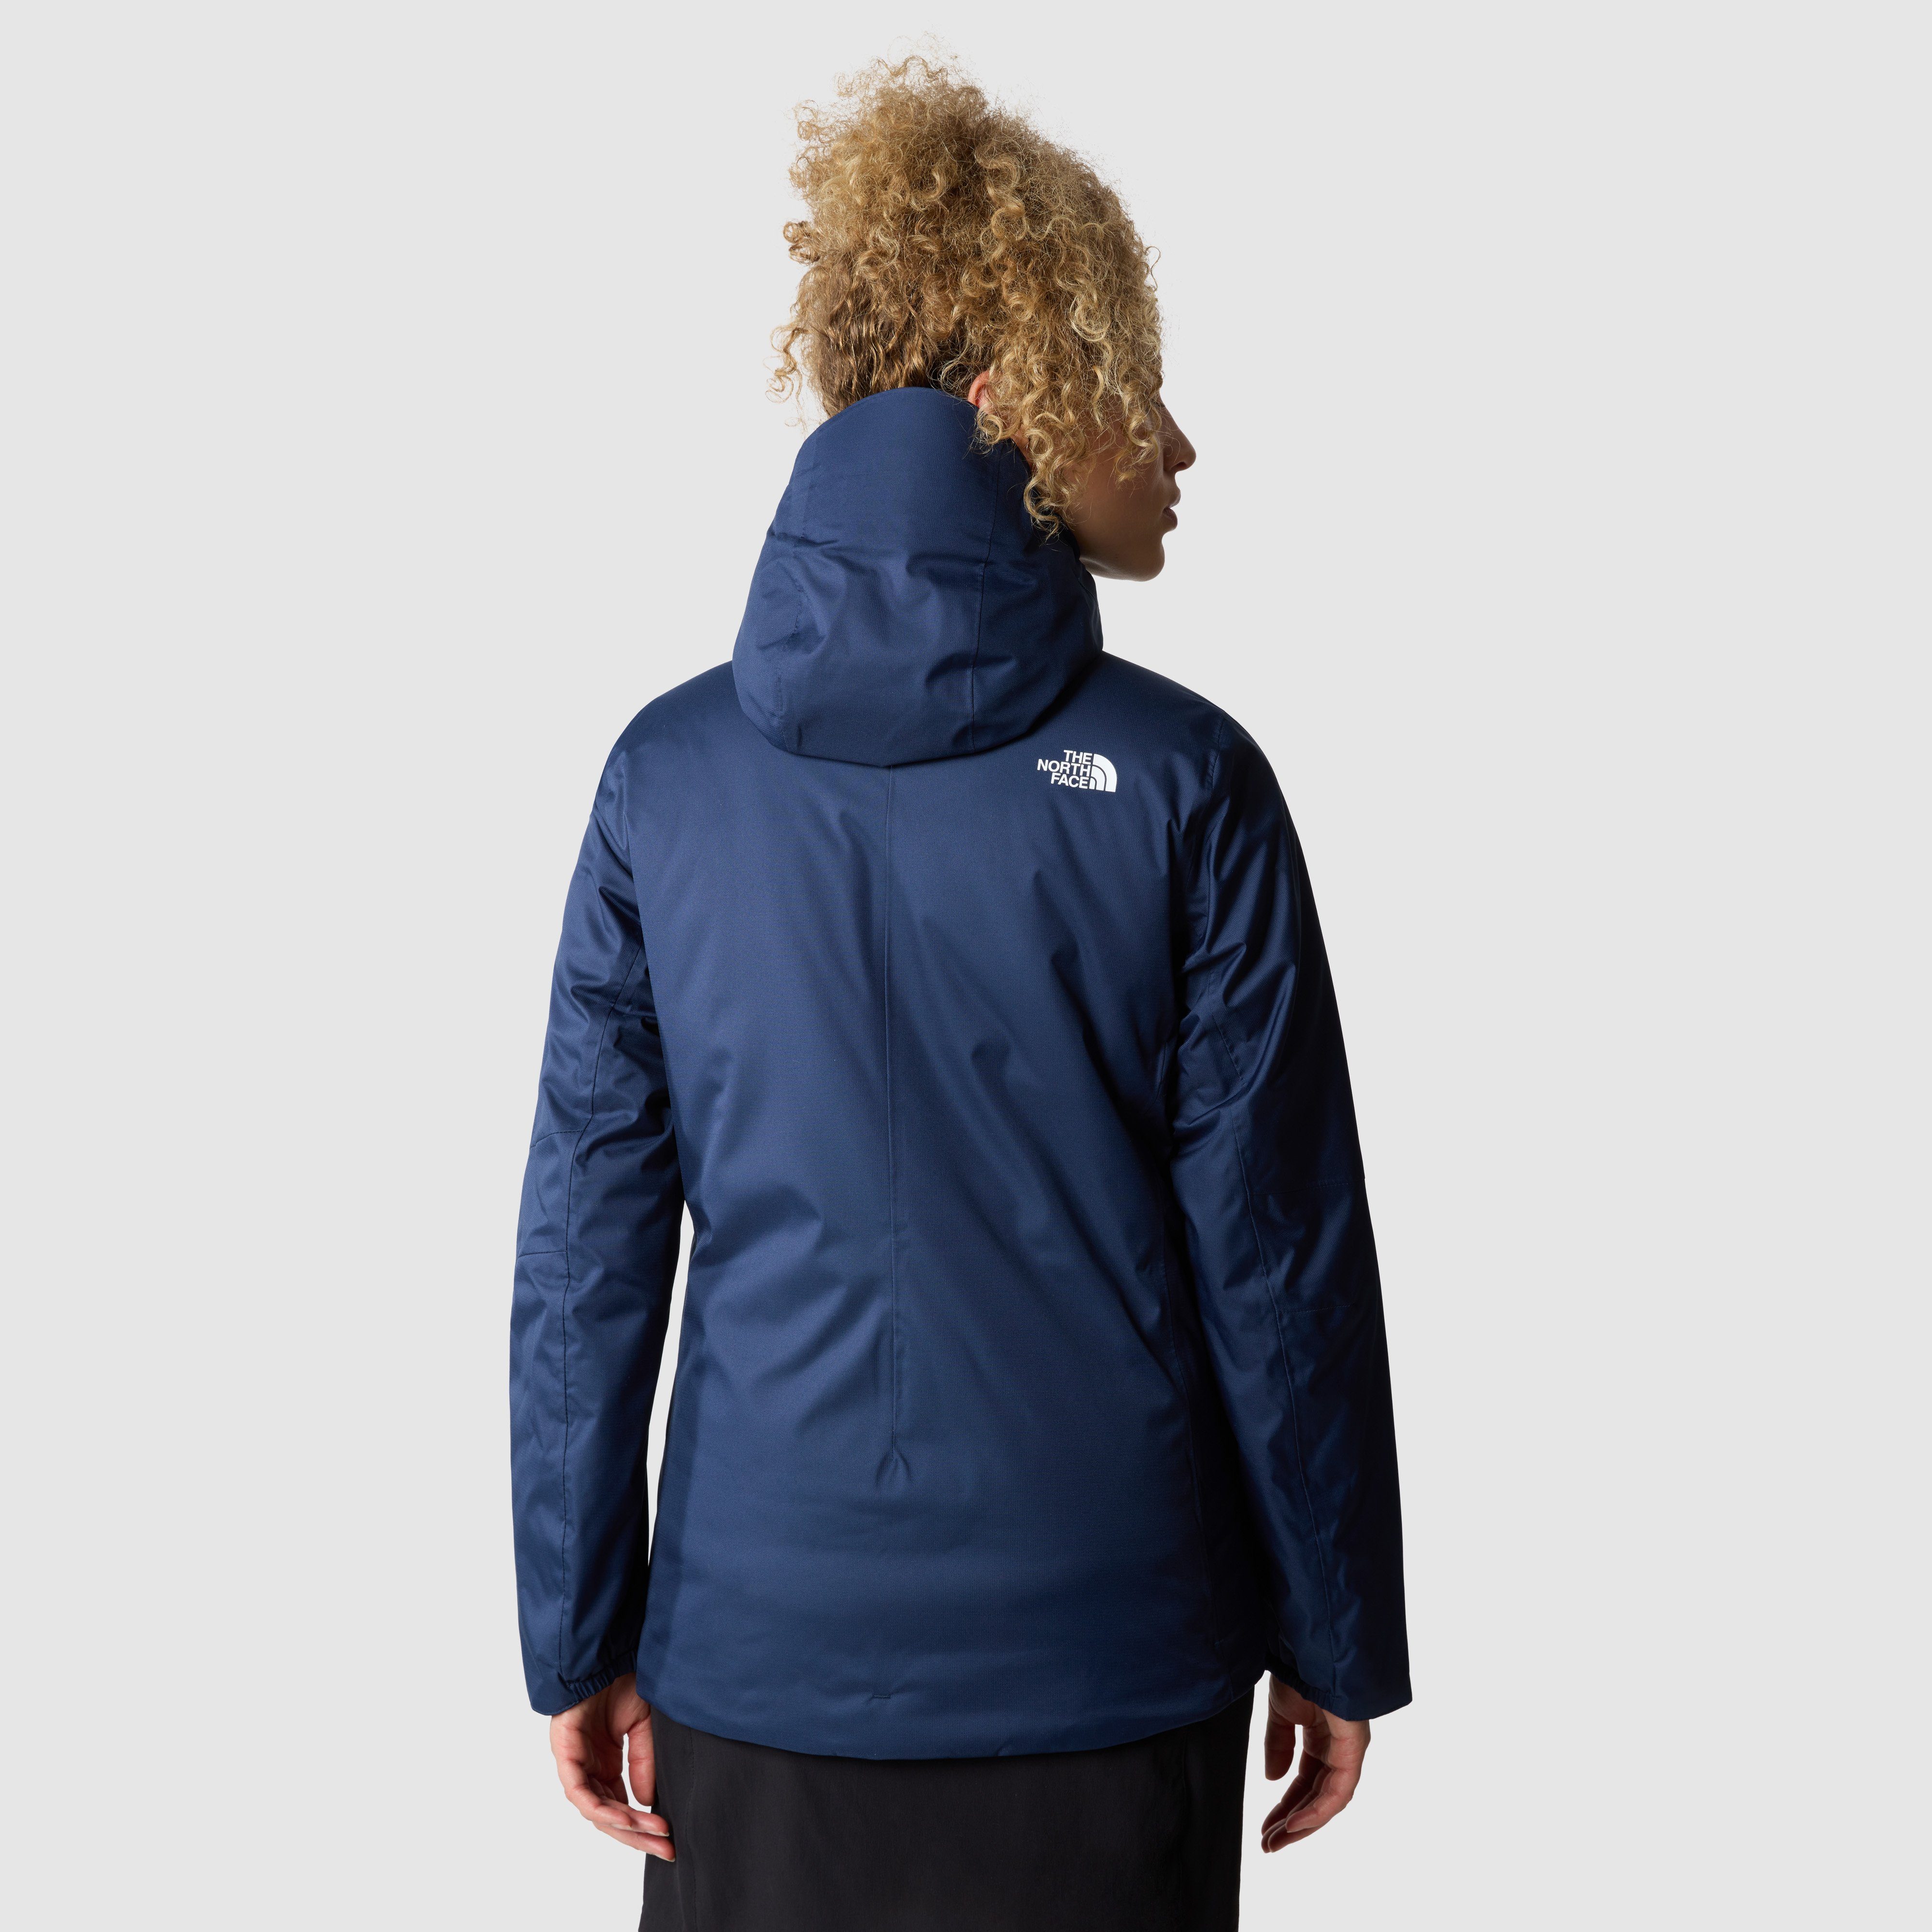 Logodruck mit QUEST Face JACKET Funktionsjacke INSULATED W North The